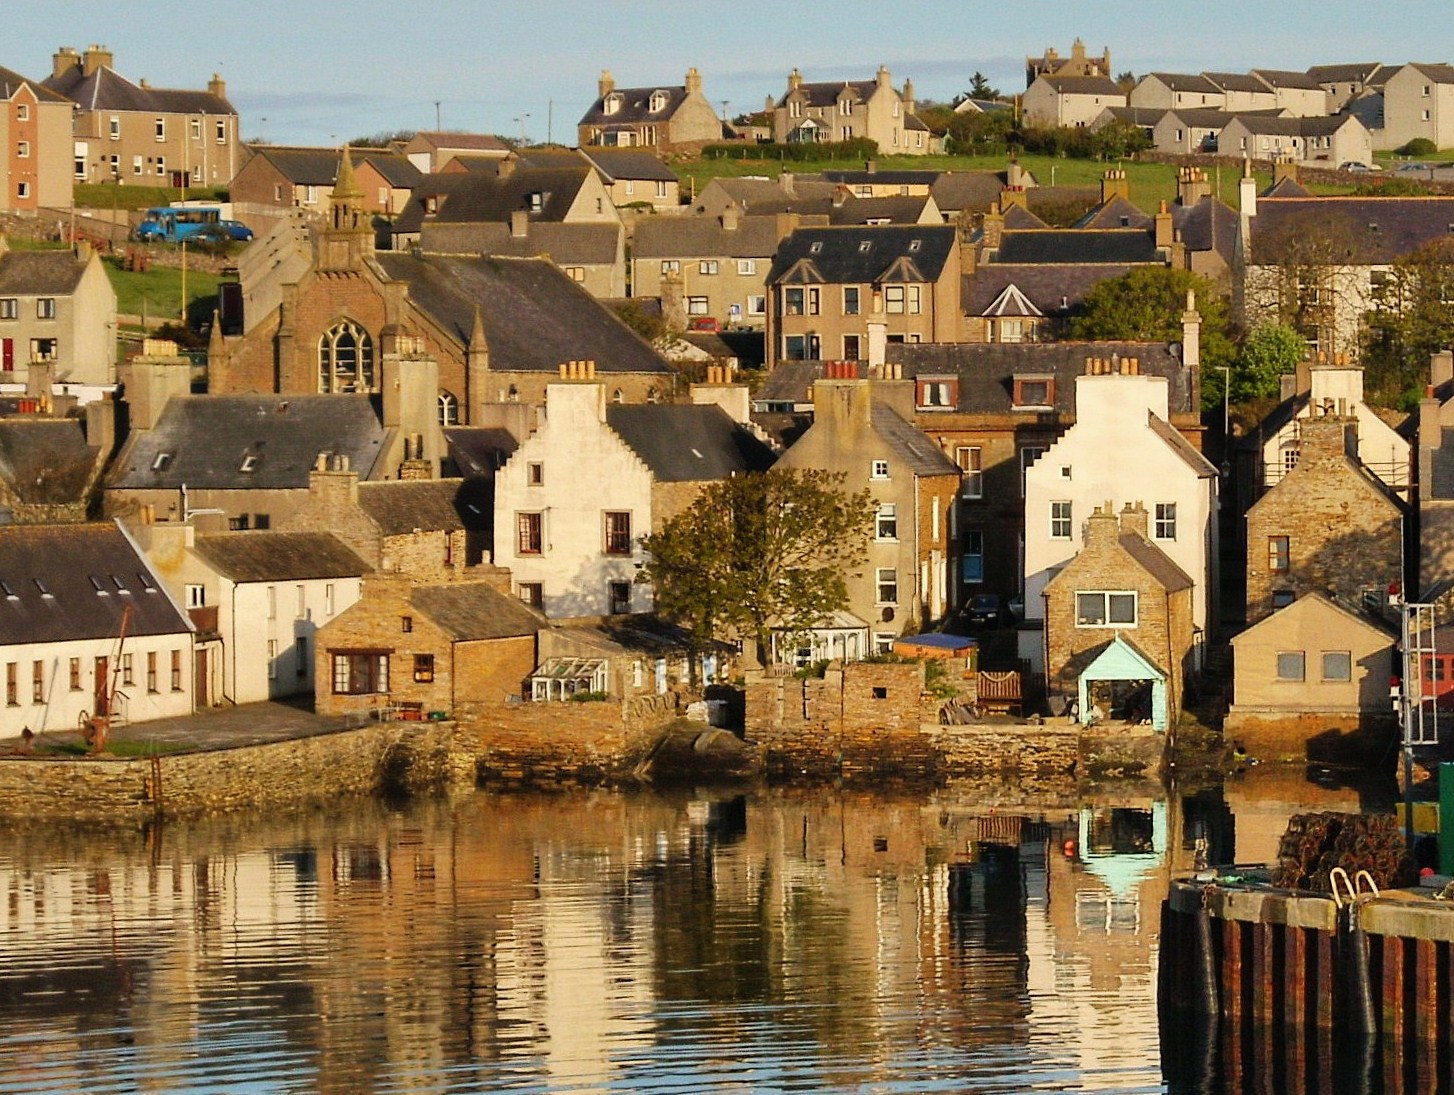 Ultima Thule: Stromness, a song in the Orkney Islands